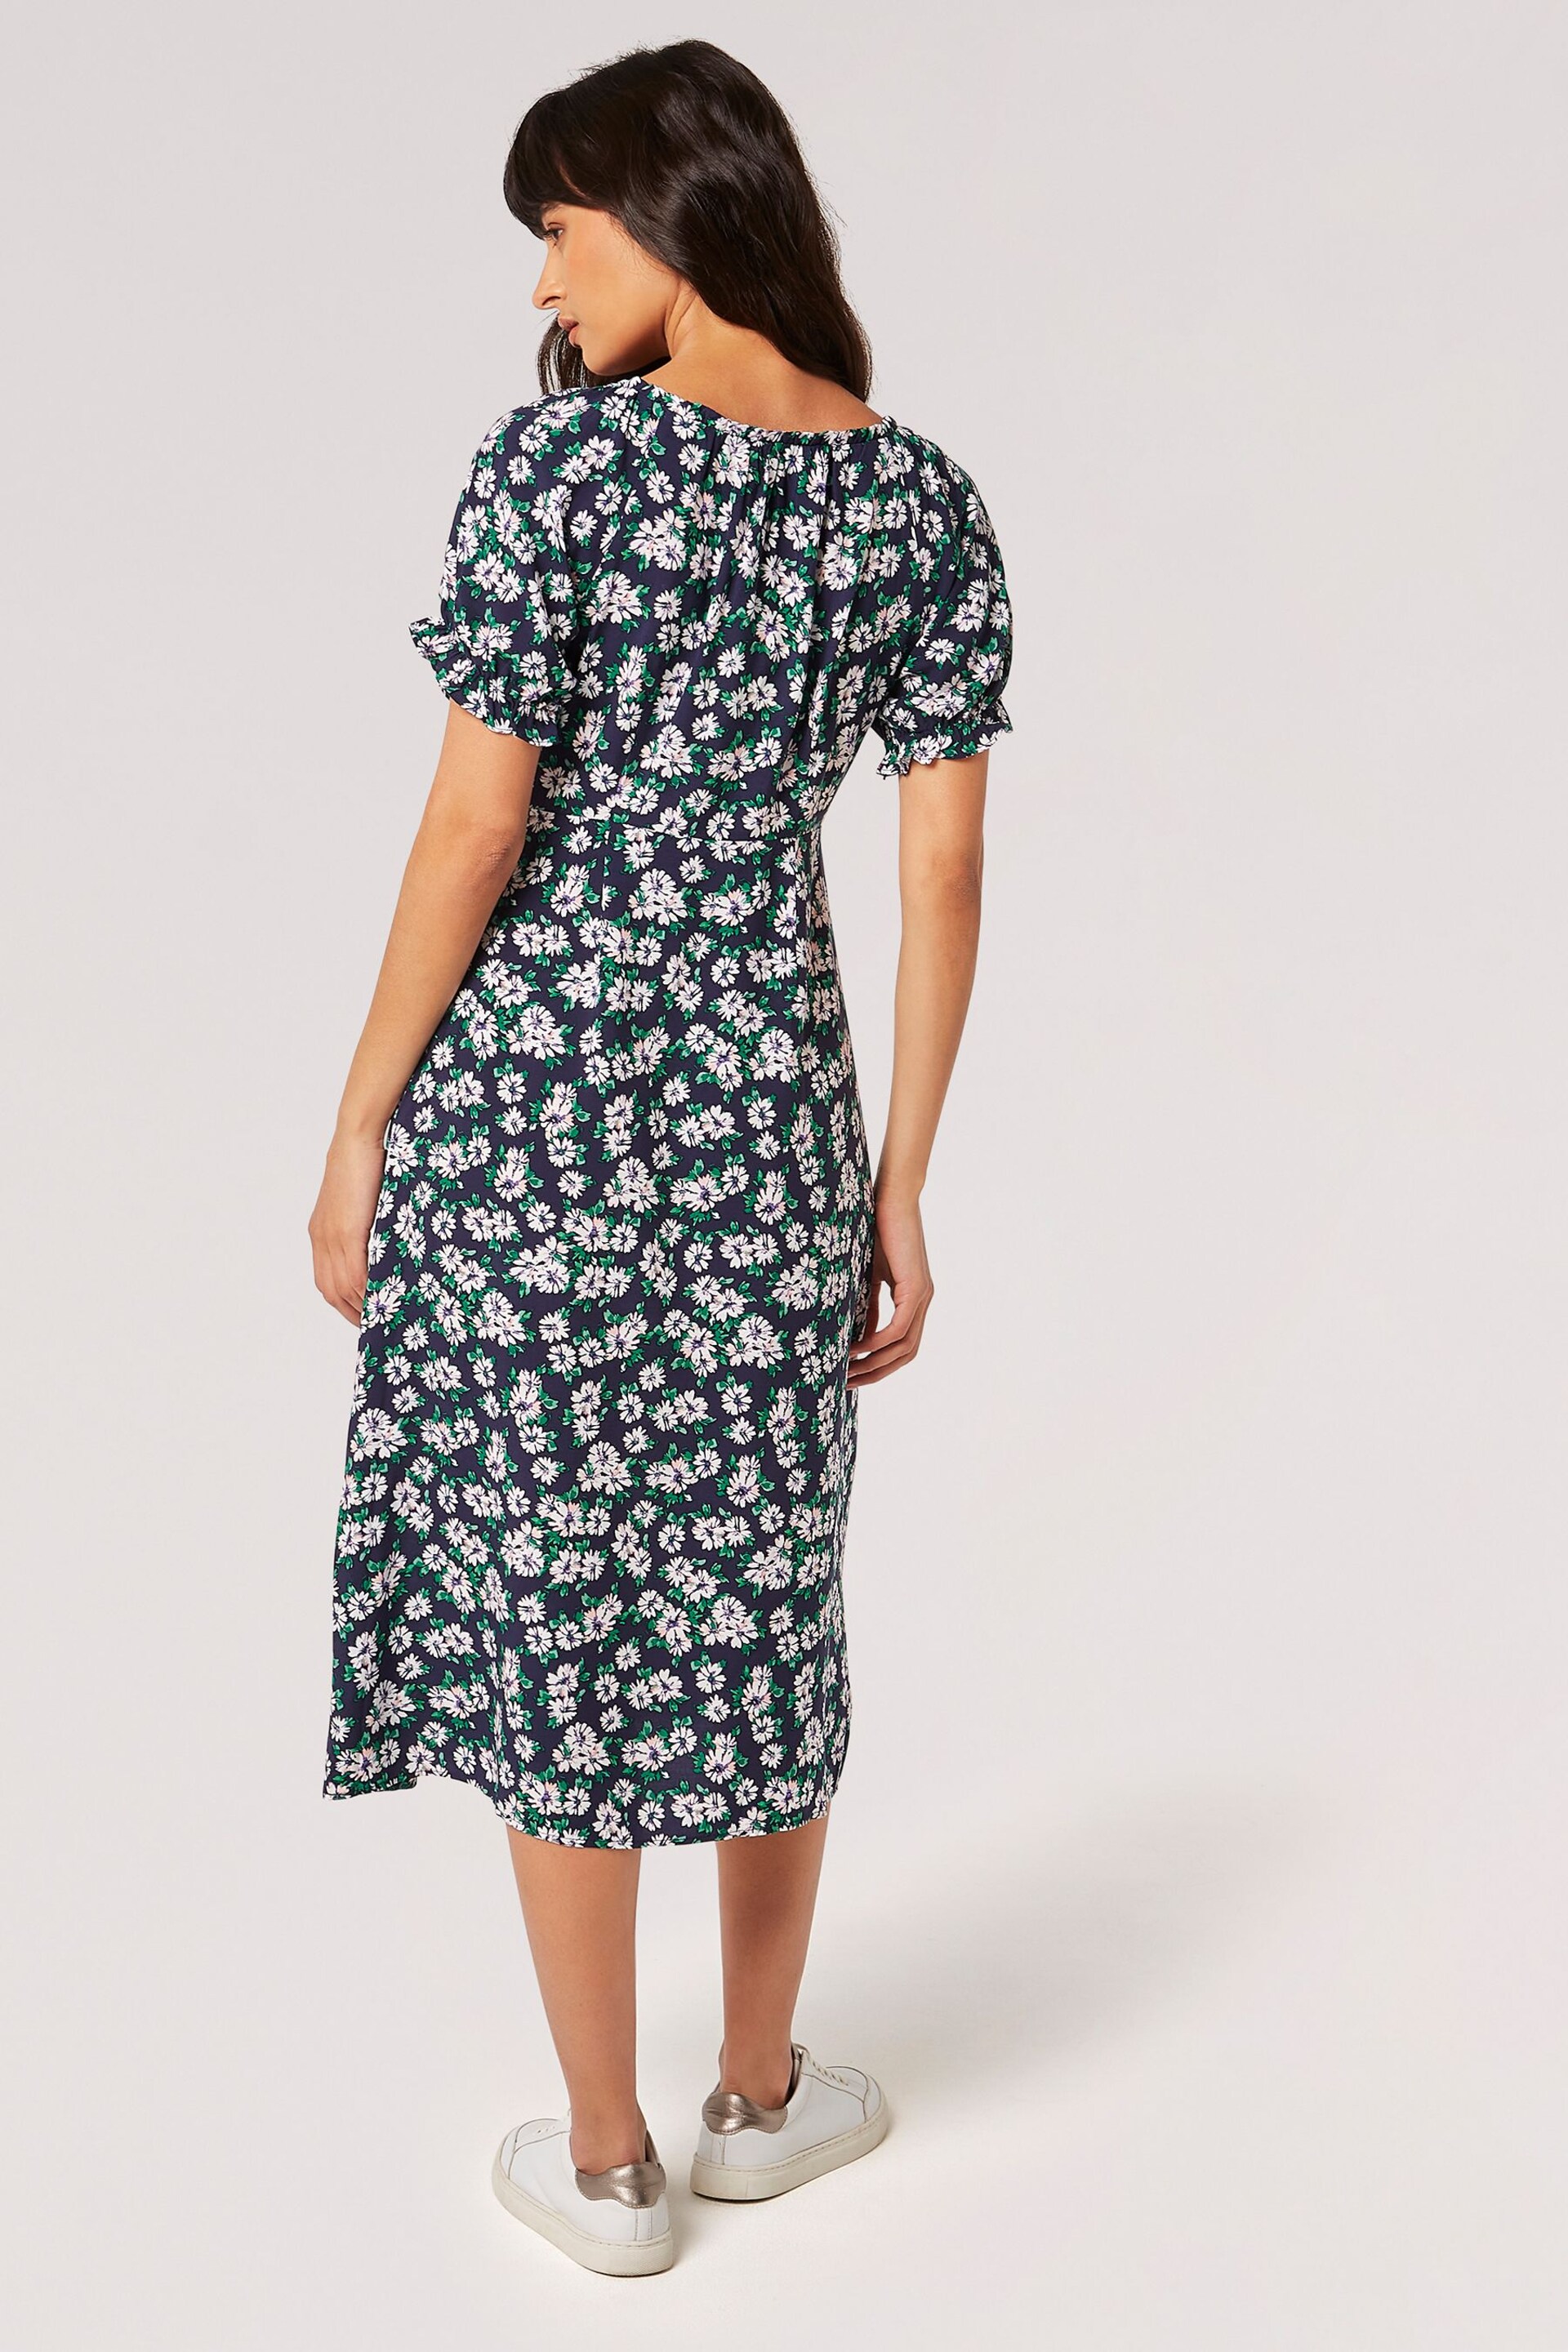 Apricot Blue Daisy Floral Midi Dress - Image 4 of 4